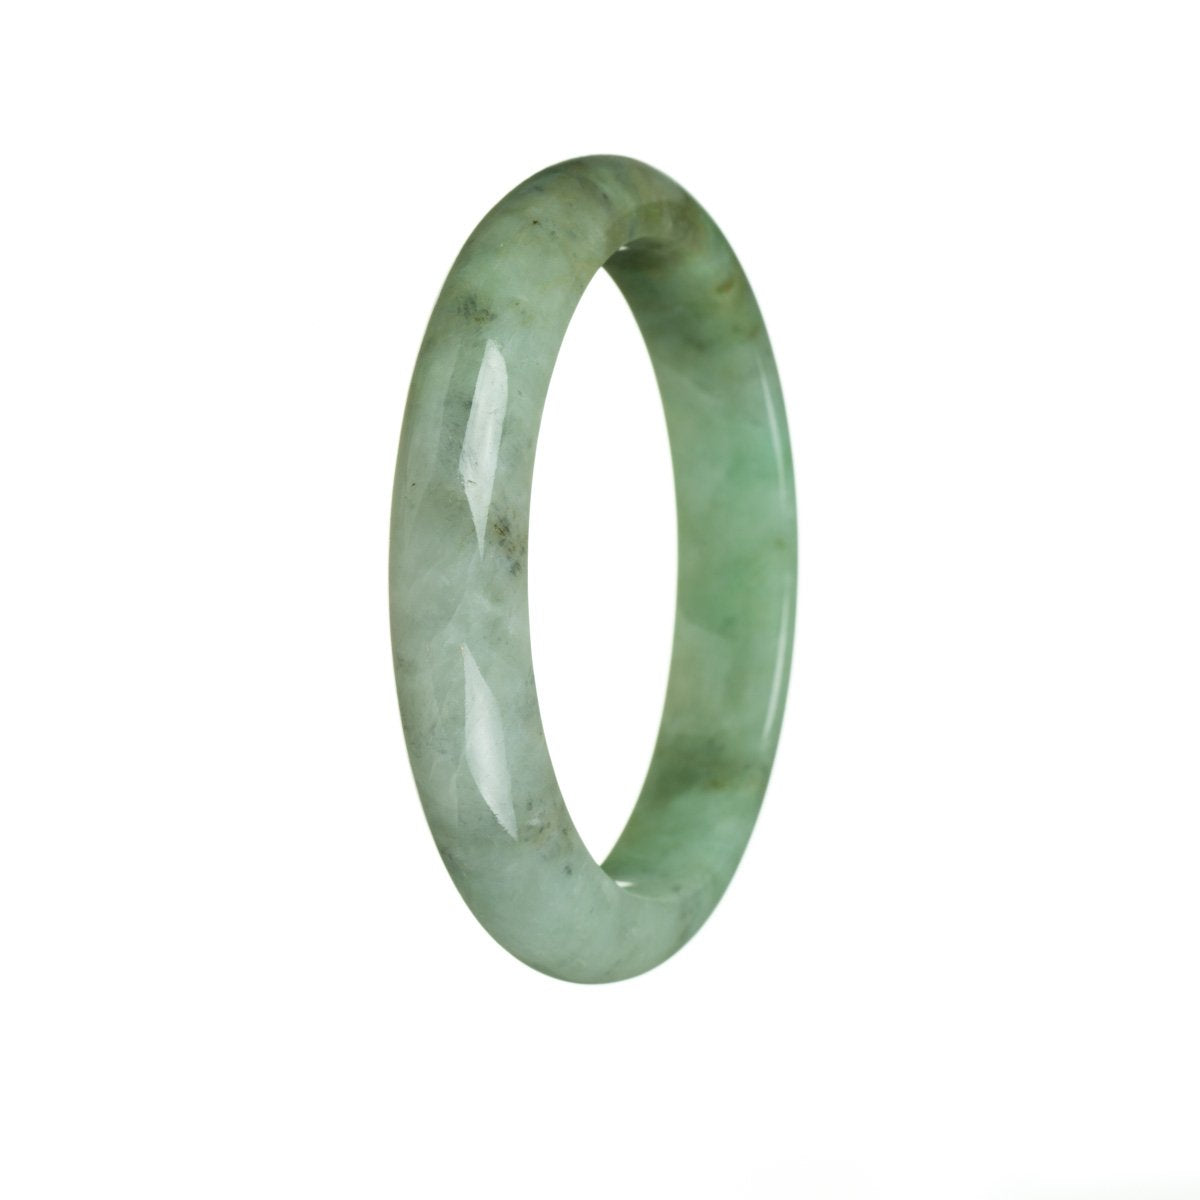 A close-up of a green jade bracelet with a semi-round shape, showcasing its natural beauty and traditional design.